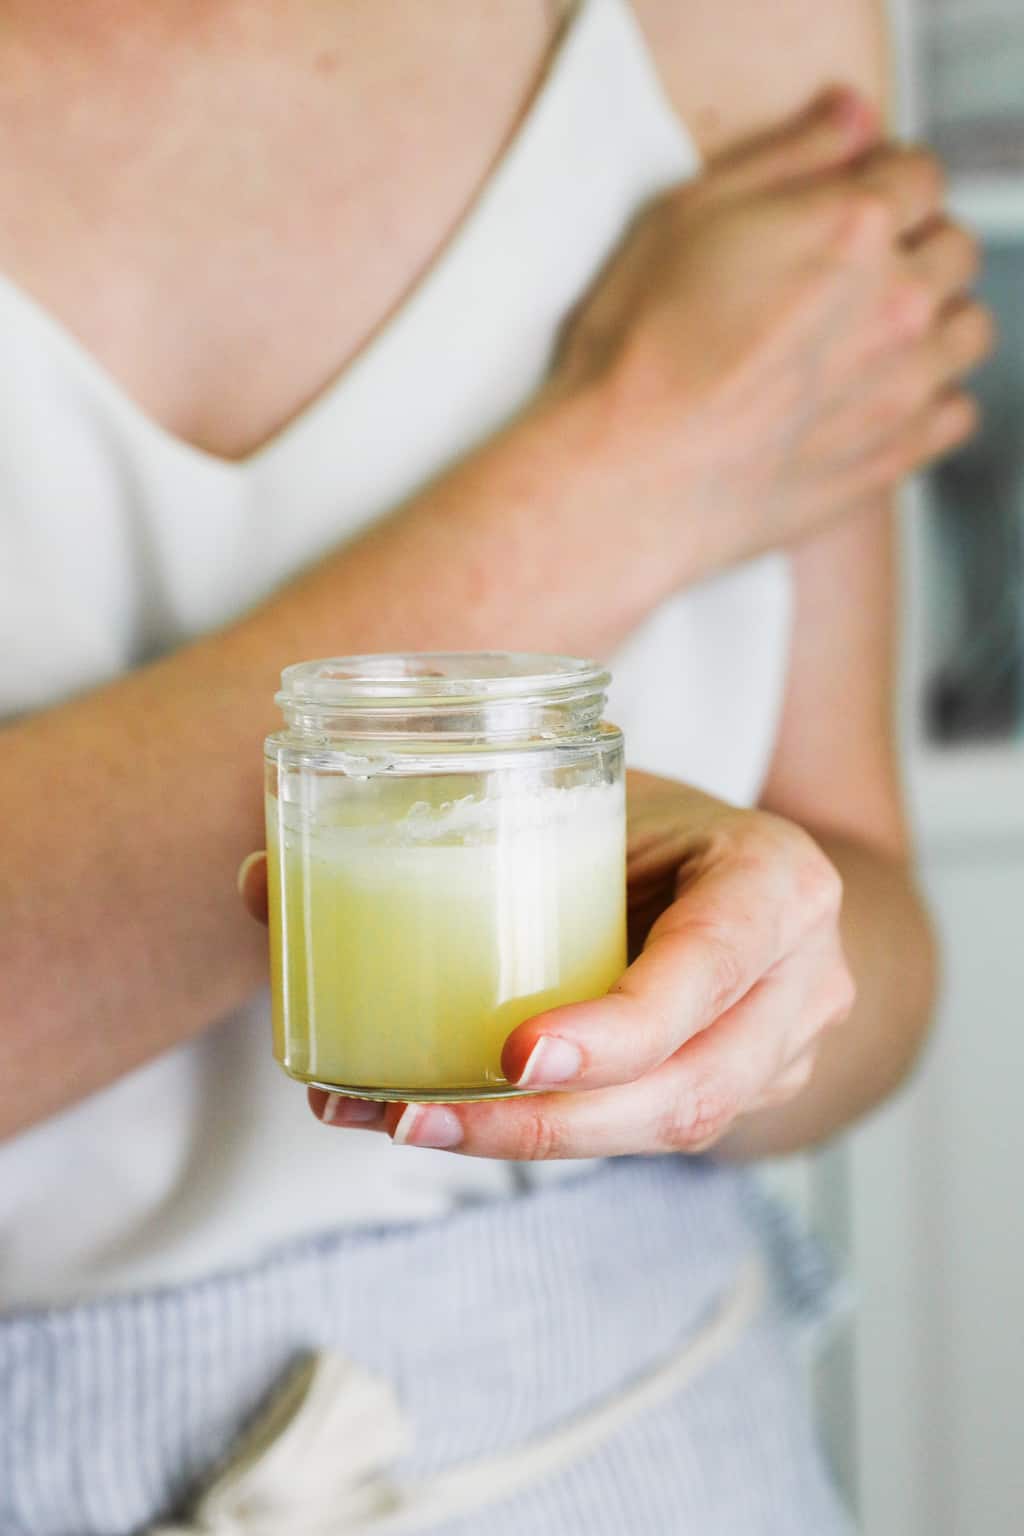 This DIY warming muscle rub is made with a blend of essential oils that soothes post-workout soreness and other aches and pains.